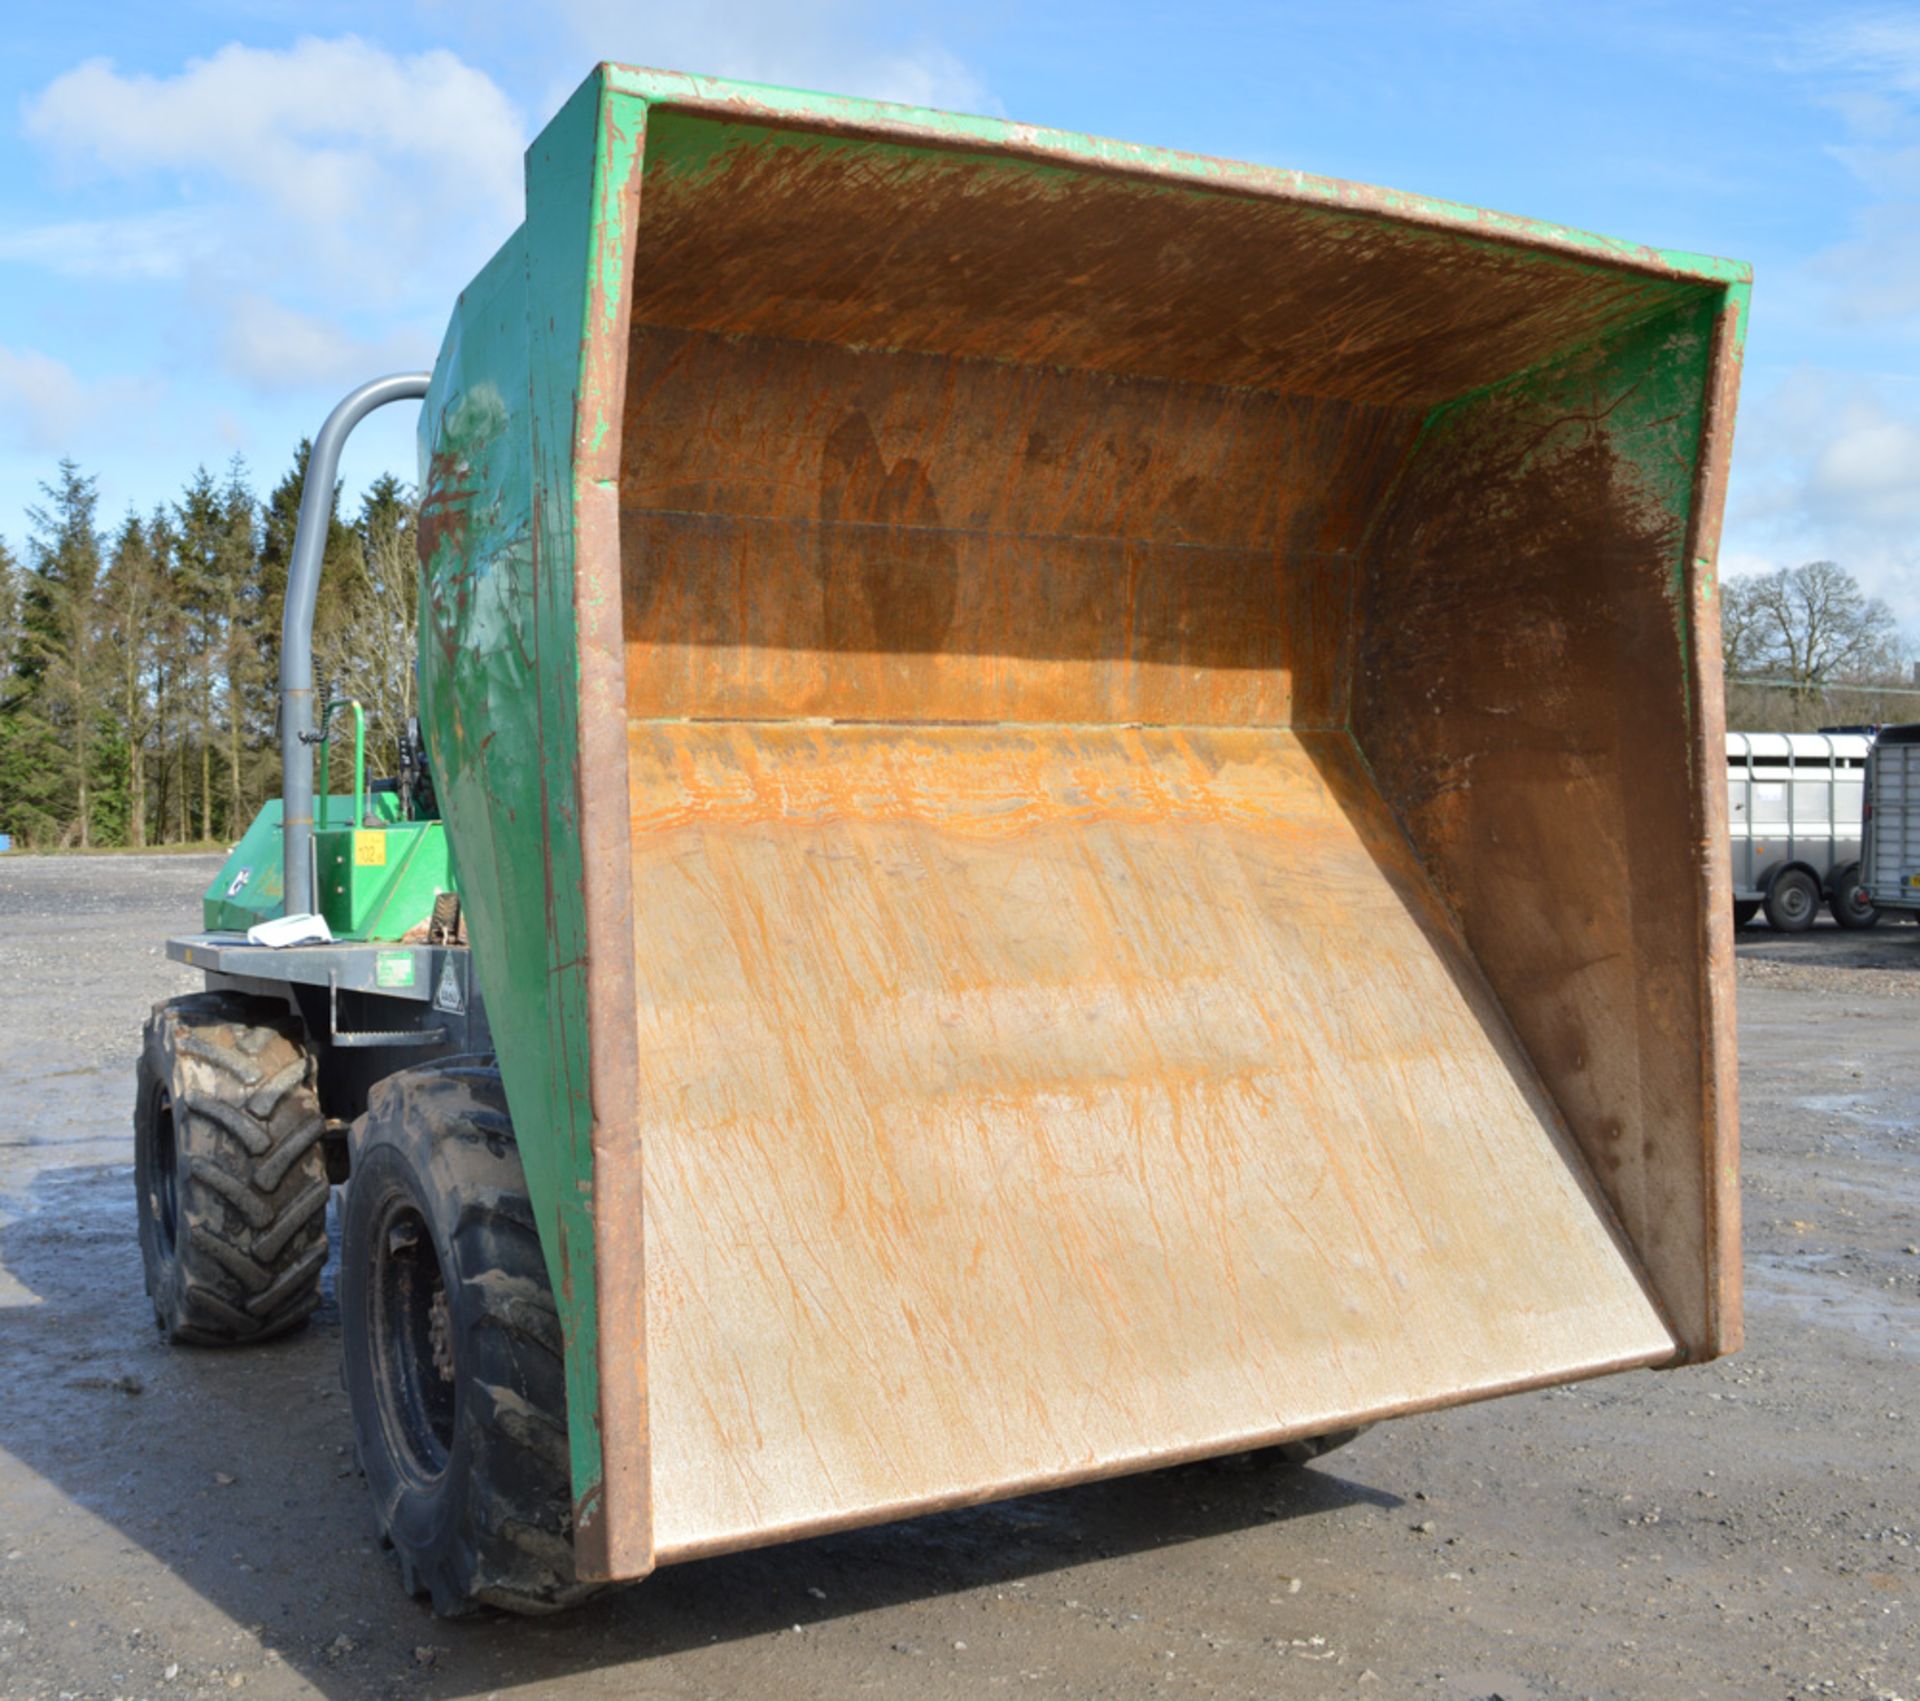 Benford Terex 6 tonne straight skip dumper Year: 2008 S/N: E804MS008 Recorded Hours: 1606 A504631 - Image 7 of 12